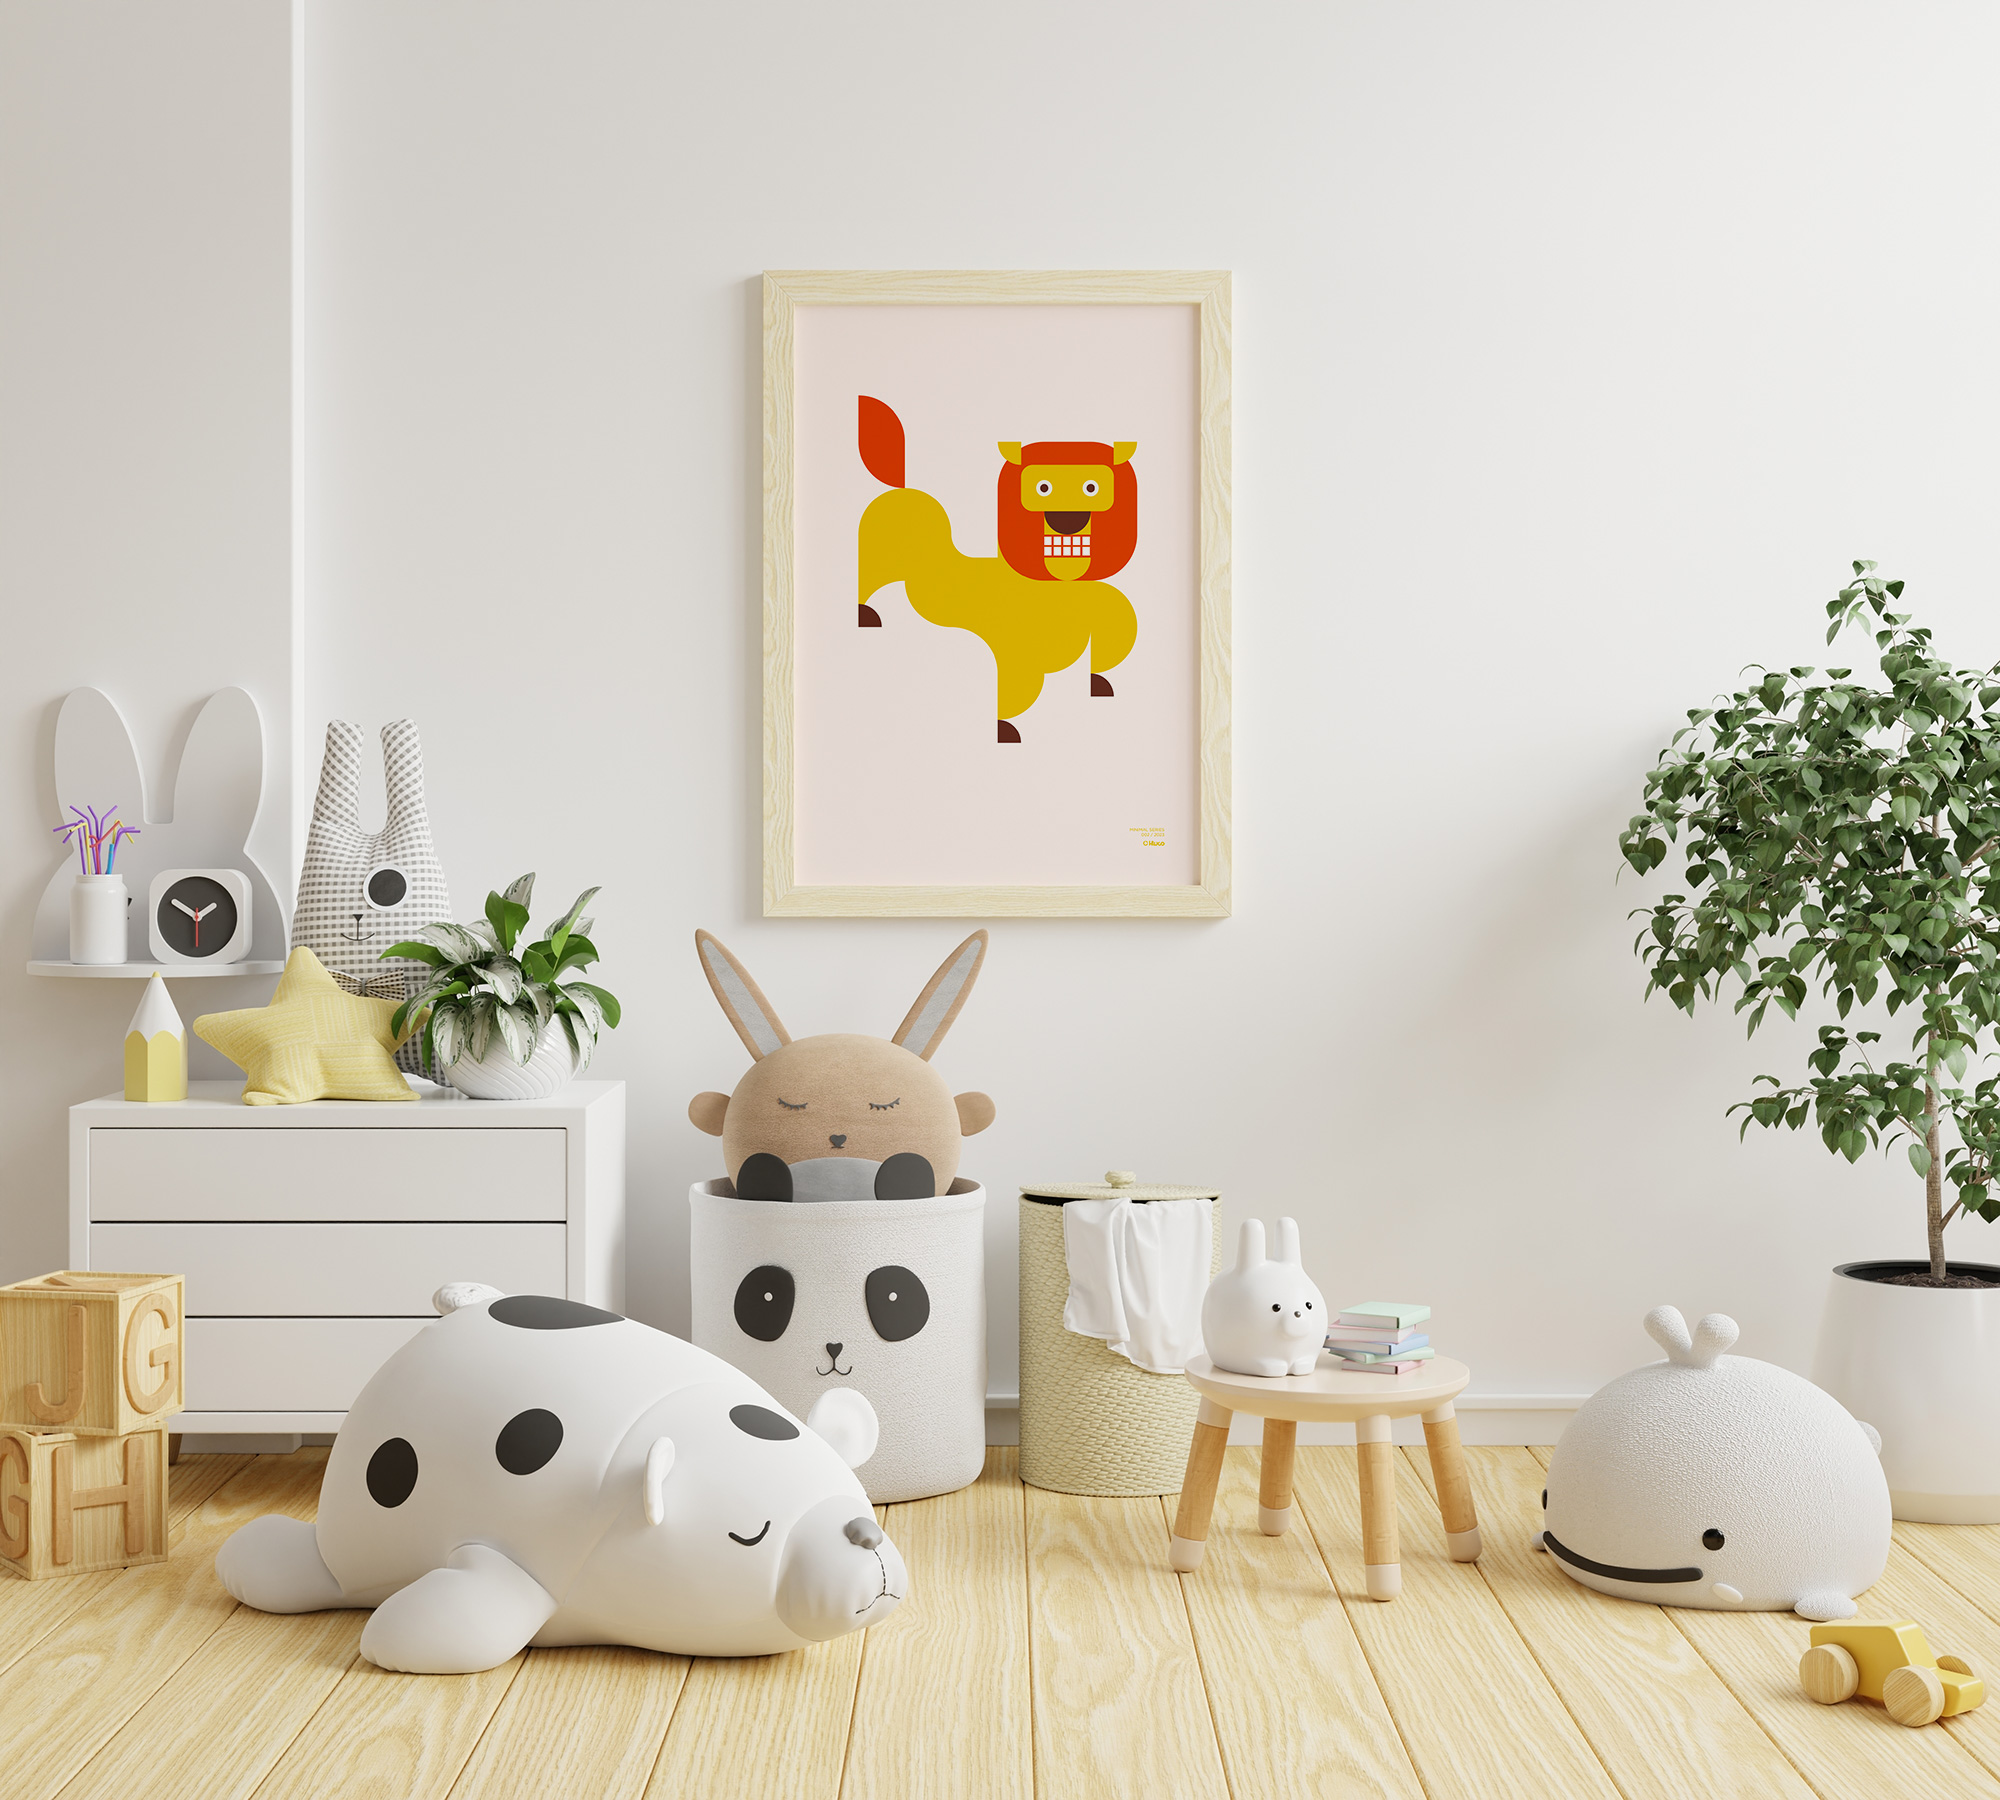 General shot of a child's room with various toys and a of a minimalist-style poster of a lion hanging on the wall.